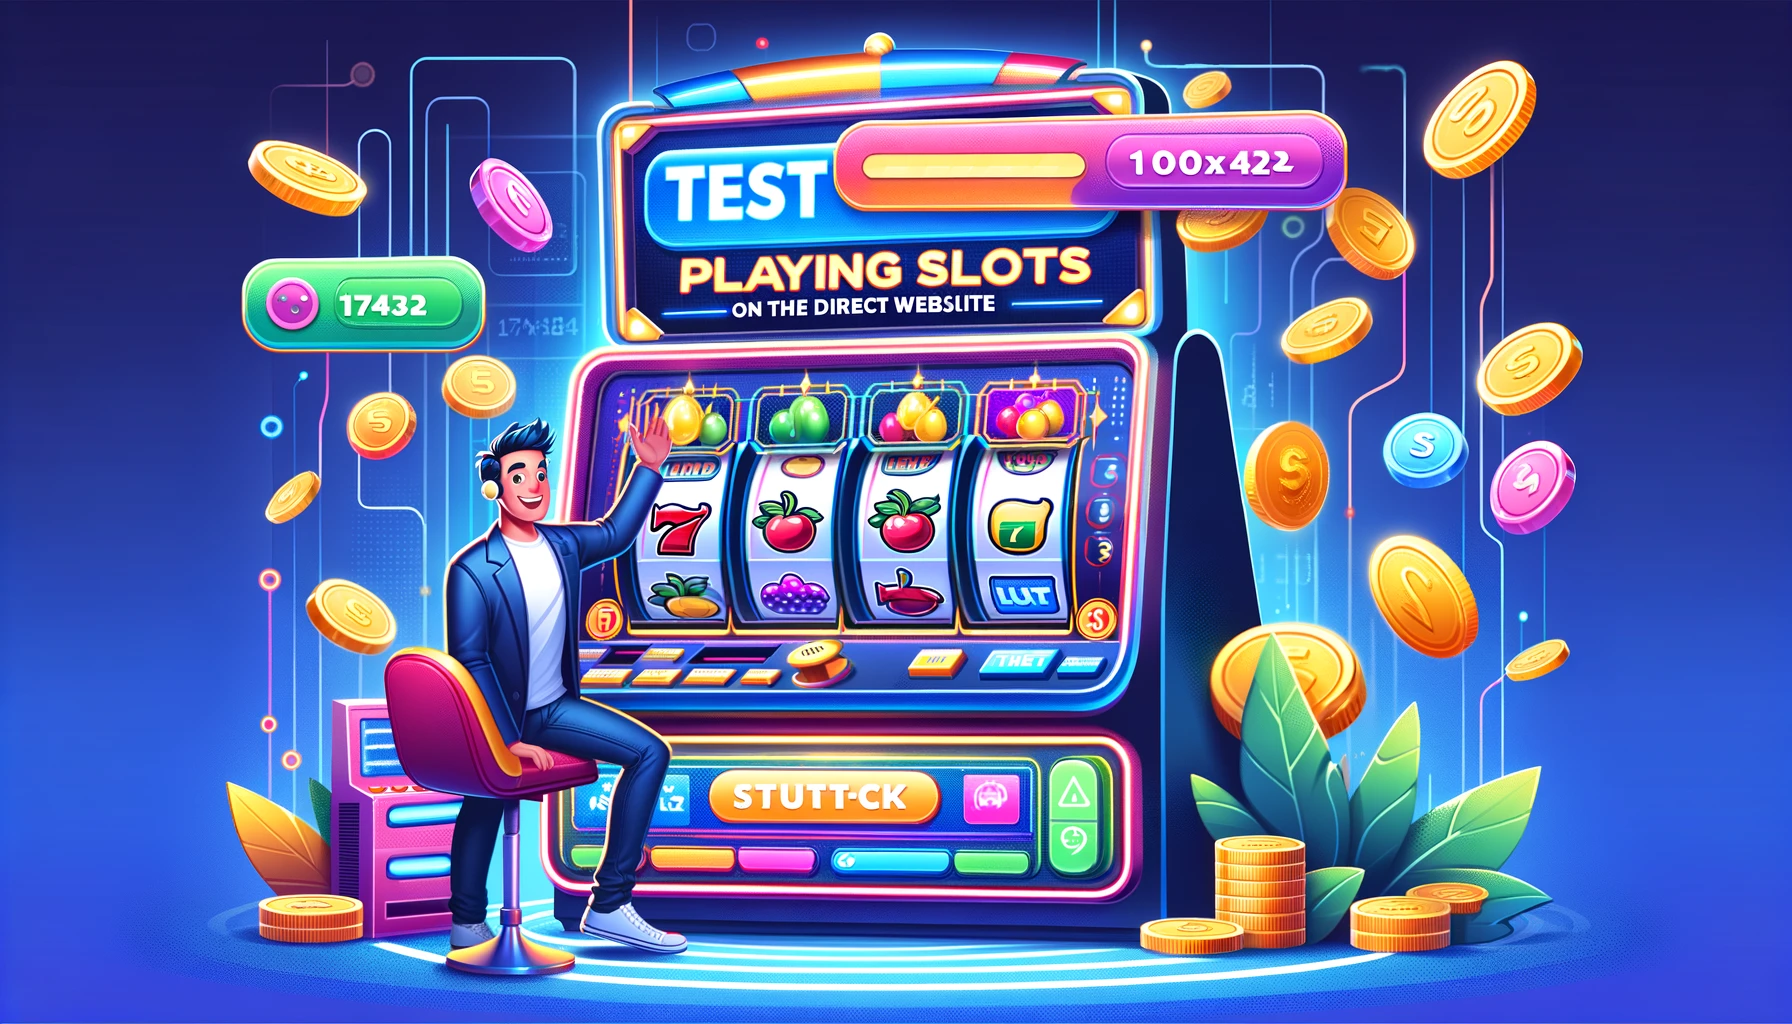 Test playing slots on the direct